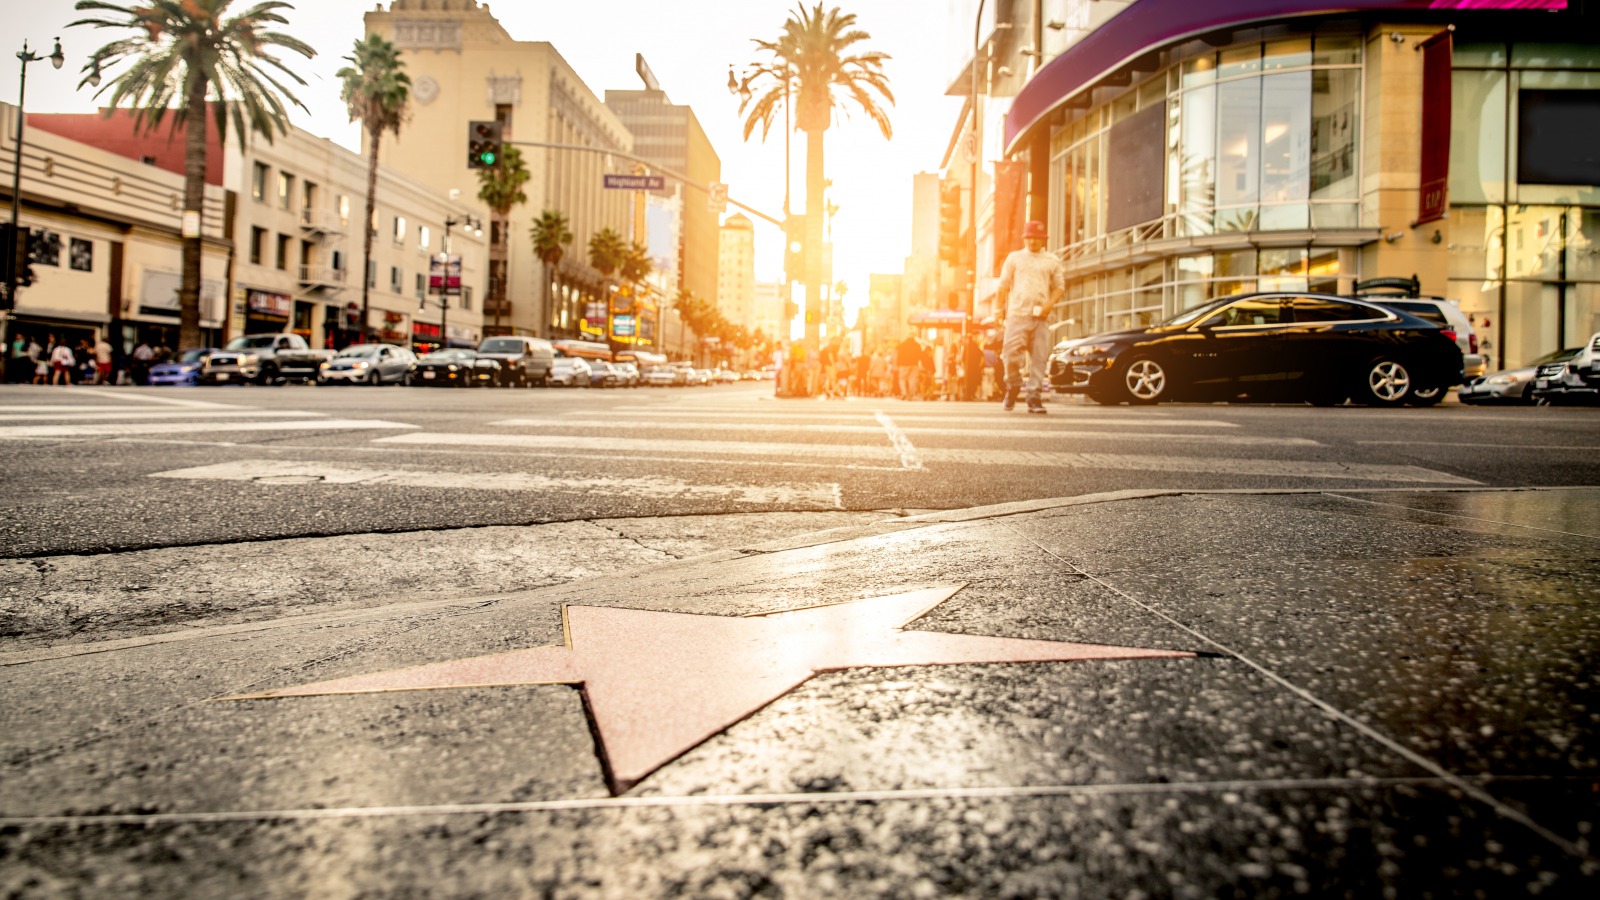 Hollywood Walk of Fame location